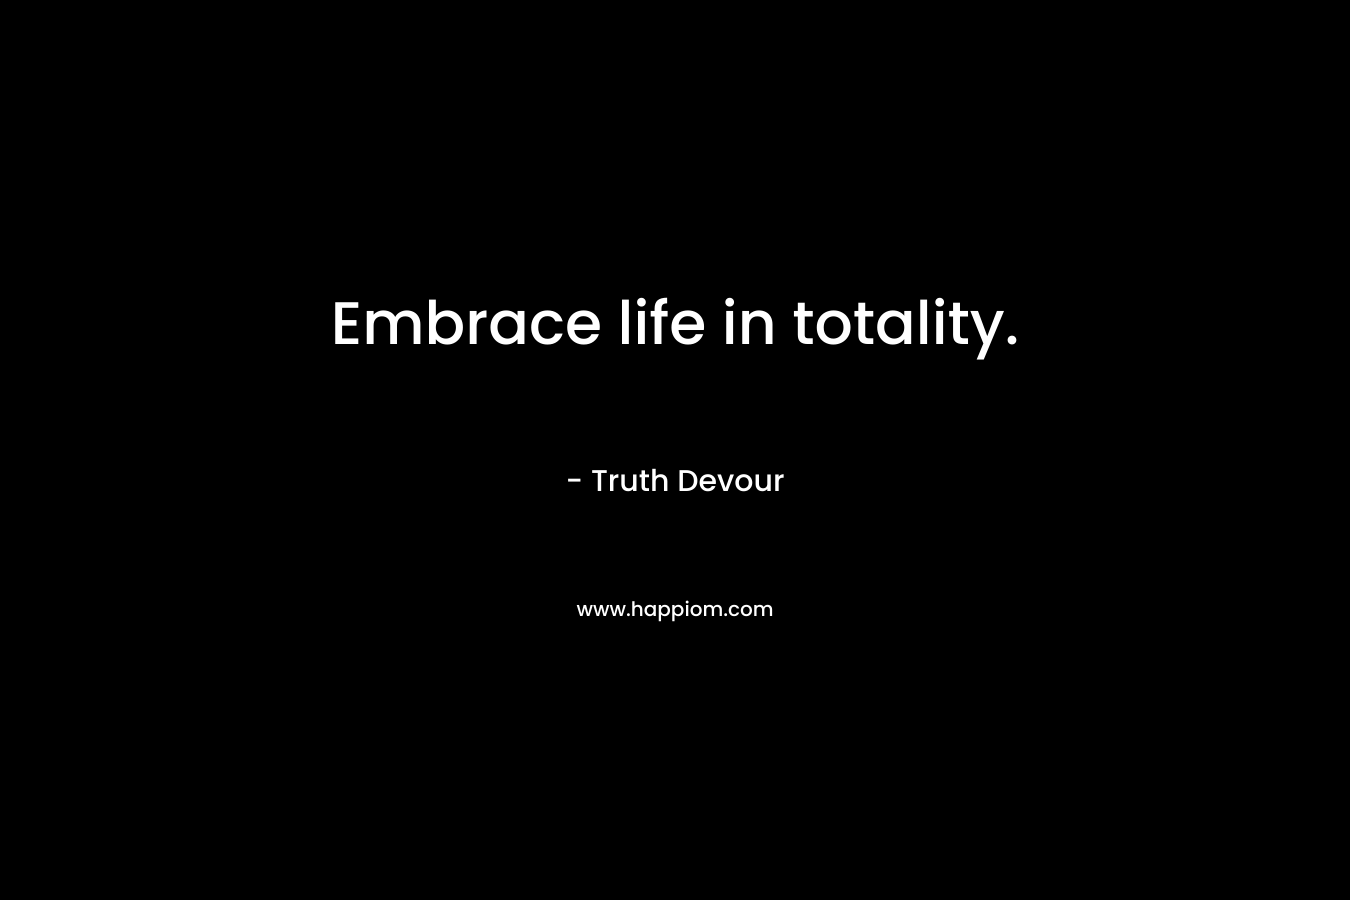 Embrace life in totality.